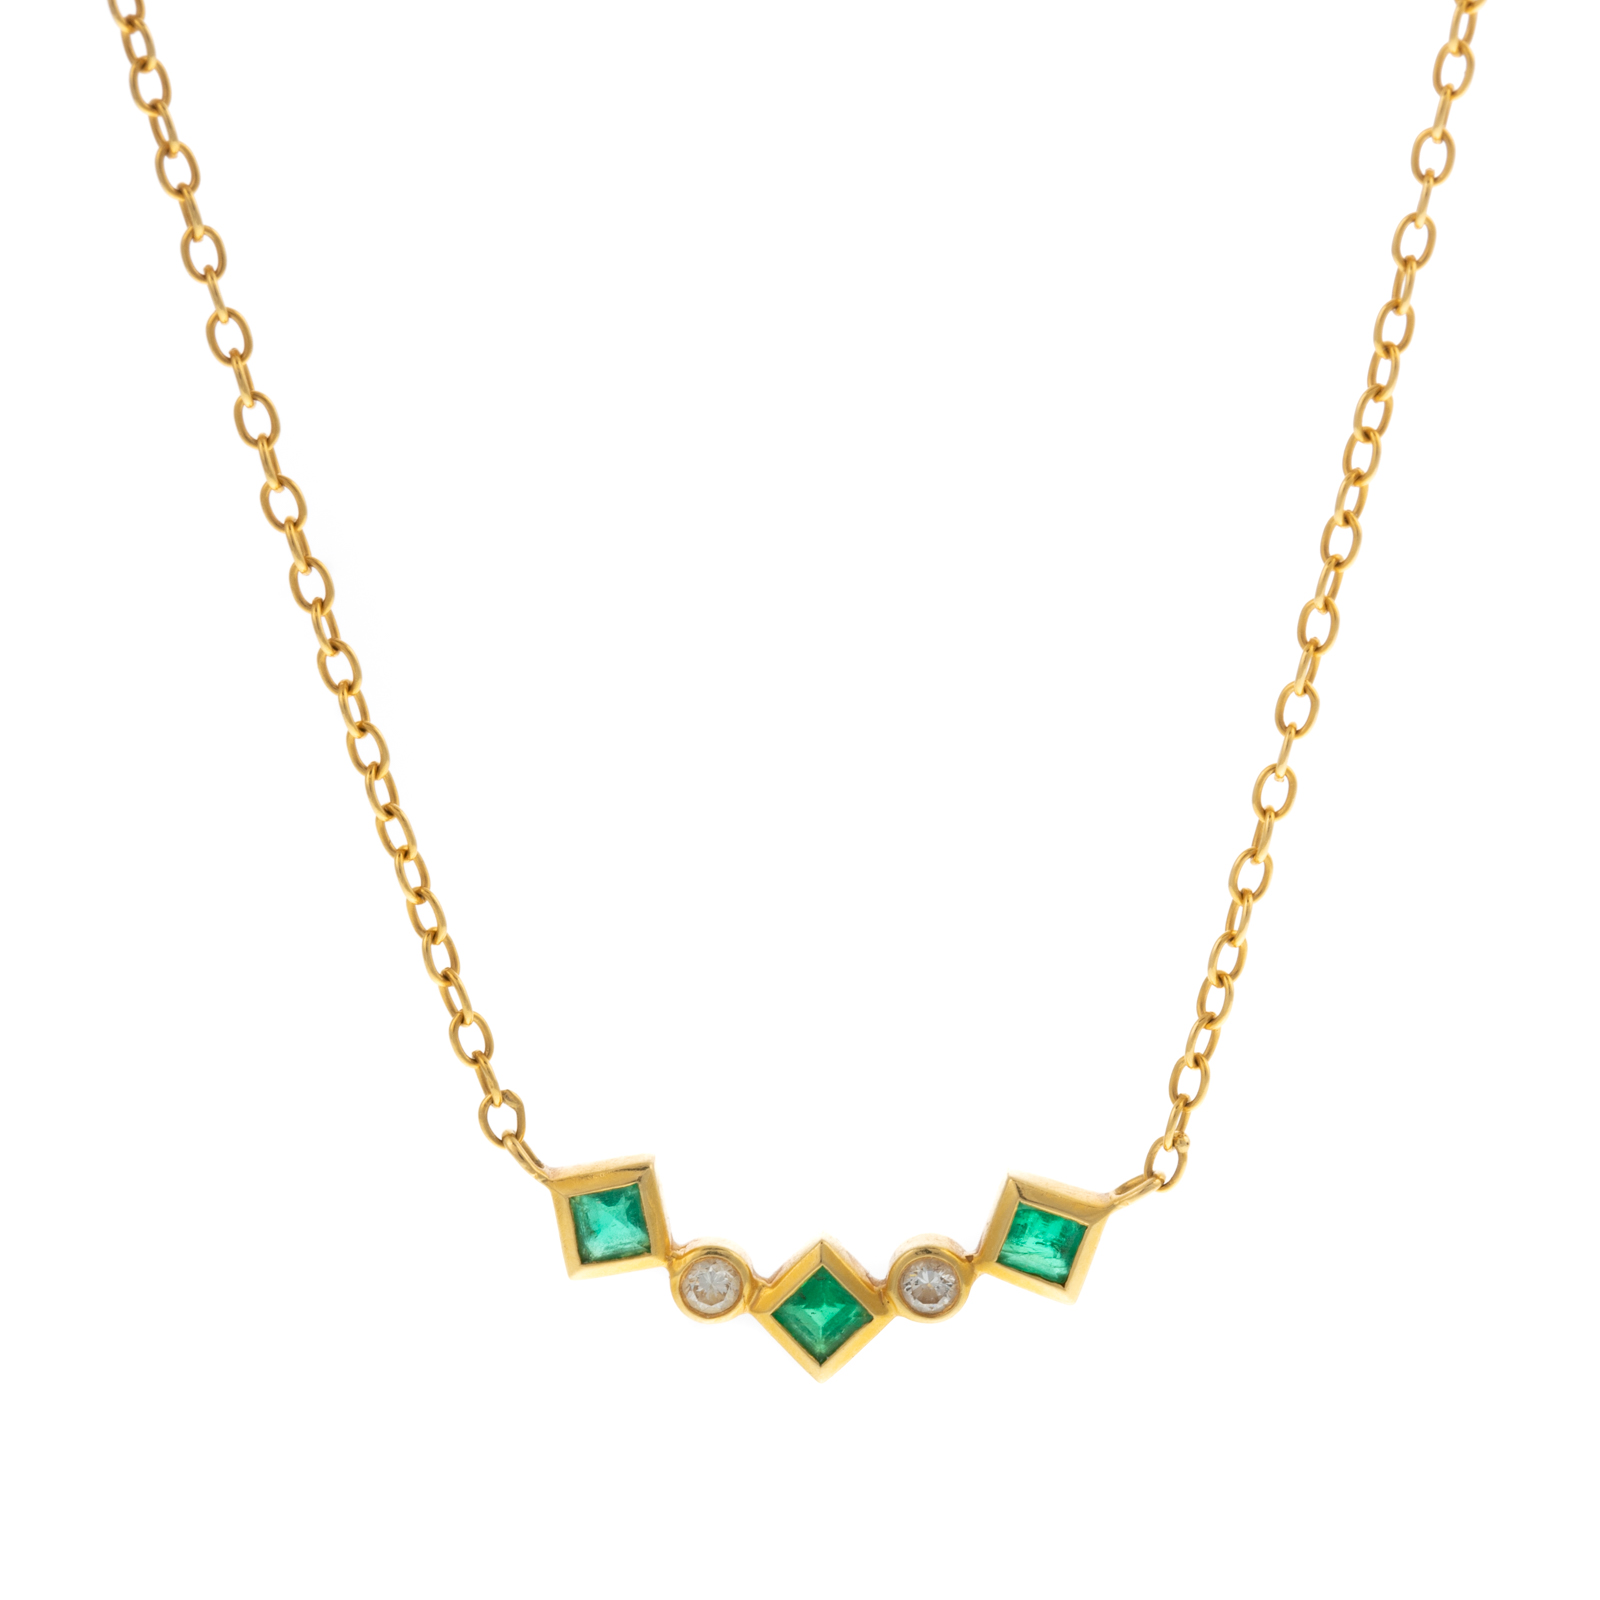 AN EMERALD & DIAMOND NECKLACE IN